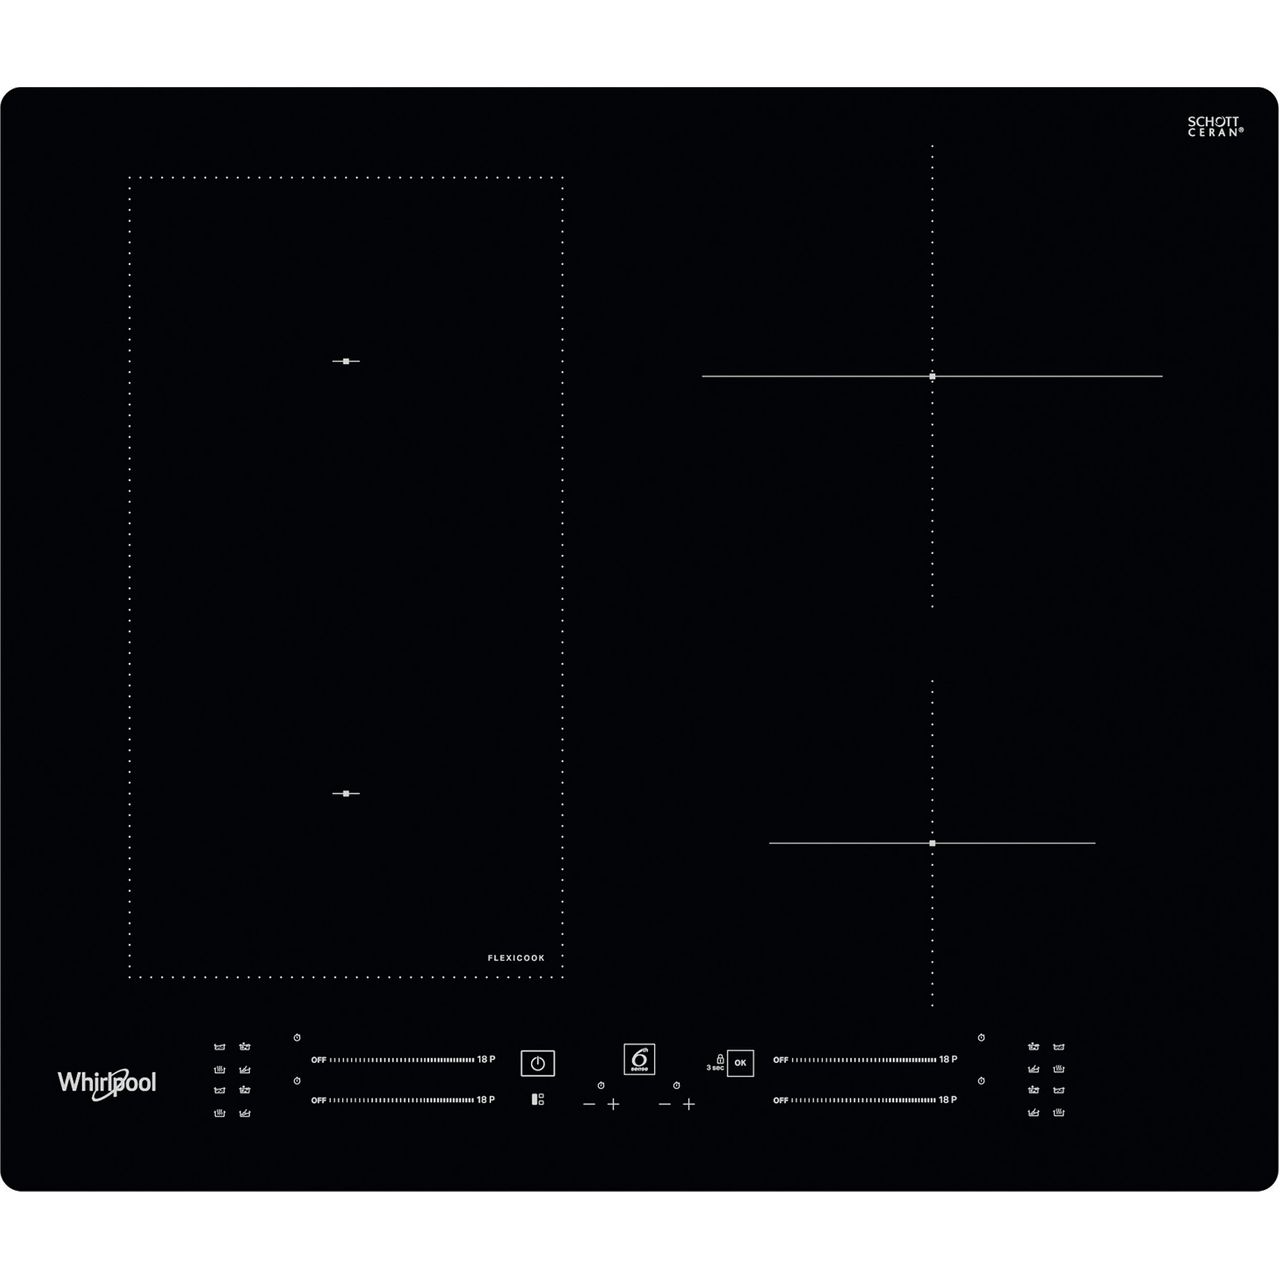 Whirlpool WLS7960NE 59cm Induction Hob Review